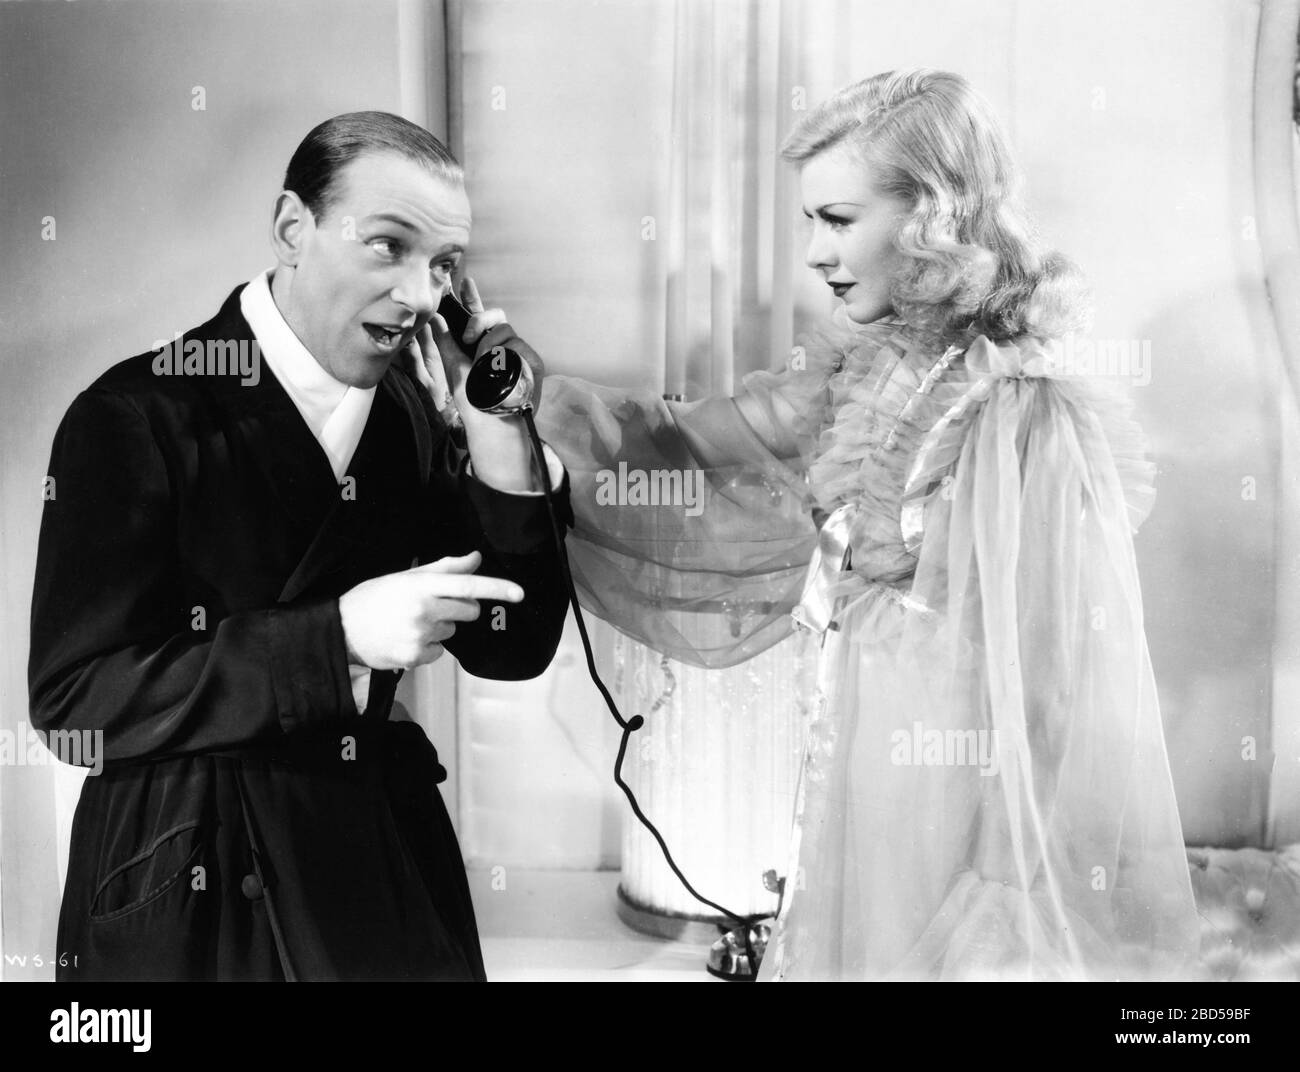 FRED ASTAIRE and GINGER ROGERS in SHALL WE DANCE 1937 director MARK SANDRICH music GEORGE GERSHWIN lyrics IRA GERSHWIN RKO Radio Pictures Stock Photo